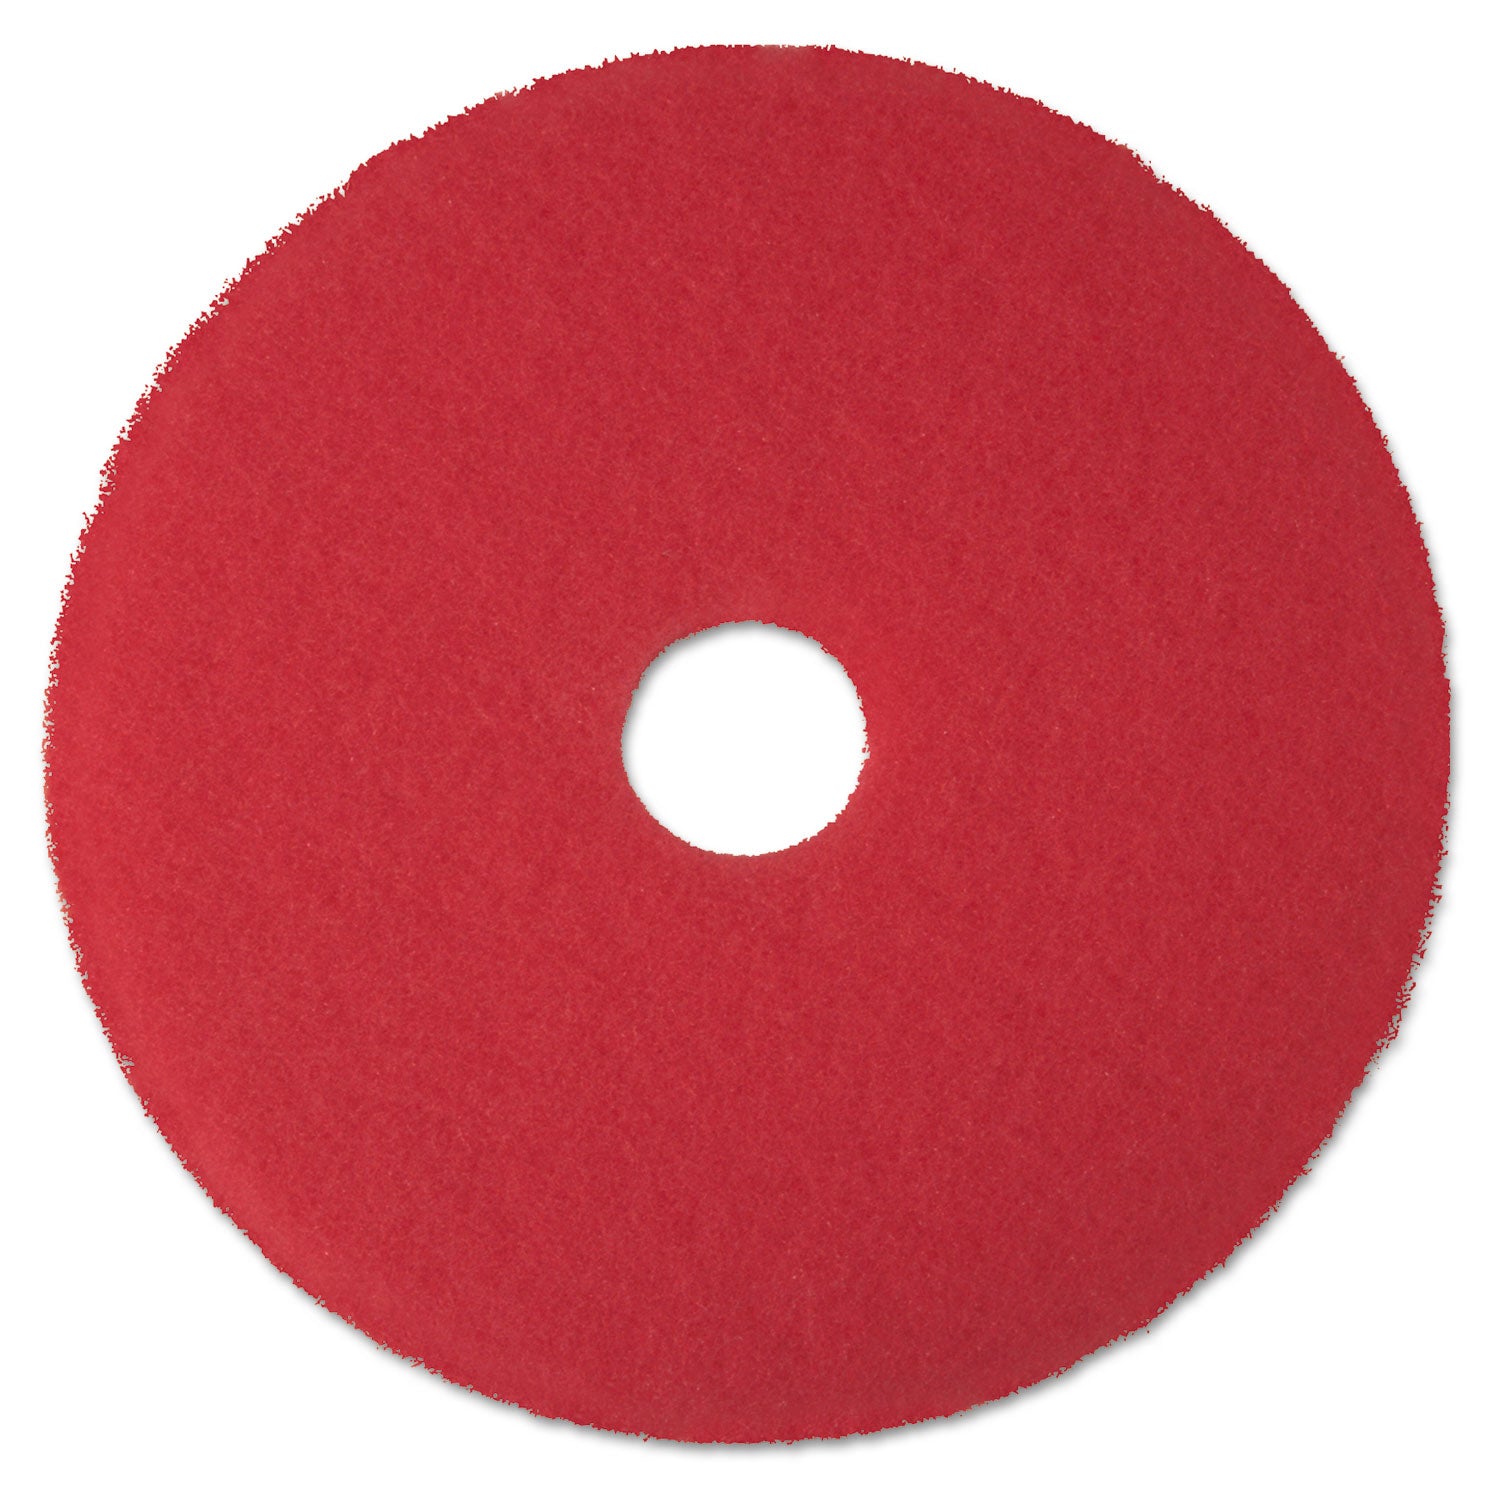 3M Red Buffer Pads - 5/Carton - Round x 17" Diameter - Buffing, Floor, Polishing, Cleaning - 175 rpm to 600 rpm Speed Supported - Textured, Adhesive, Durable, Scuff Mark Remover, Abrasive - Polyester Fiber - Red - 1